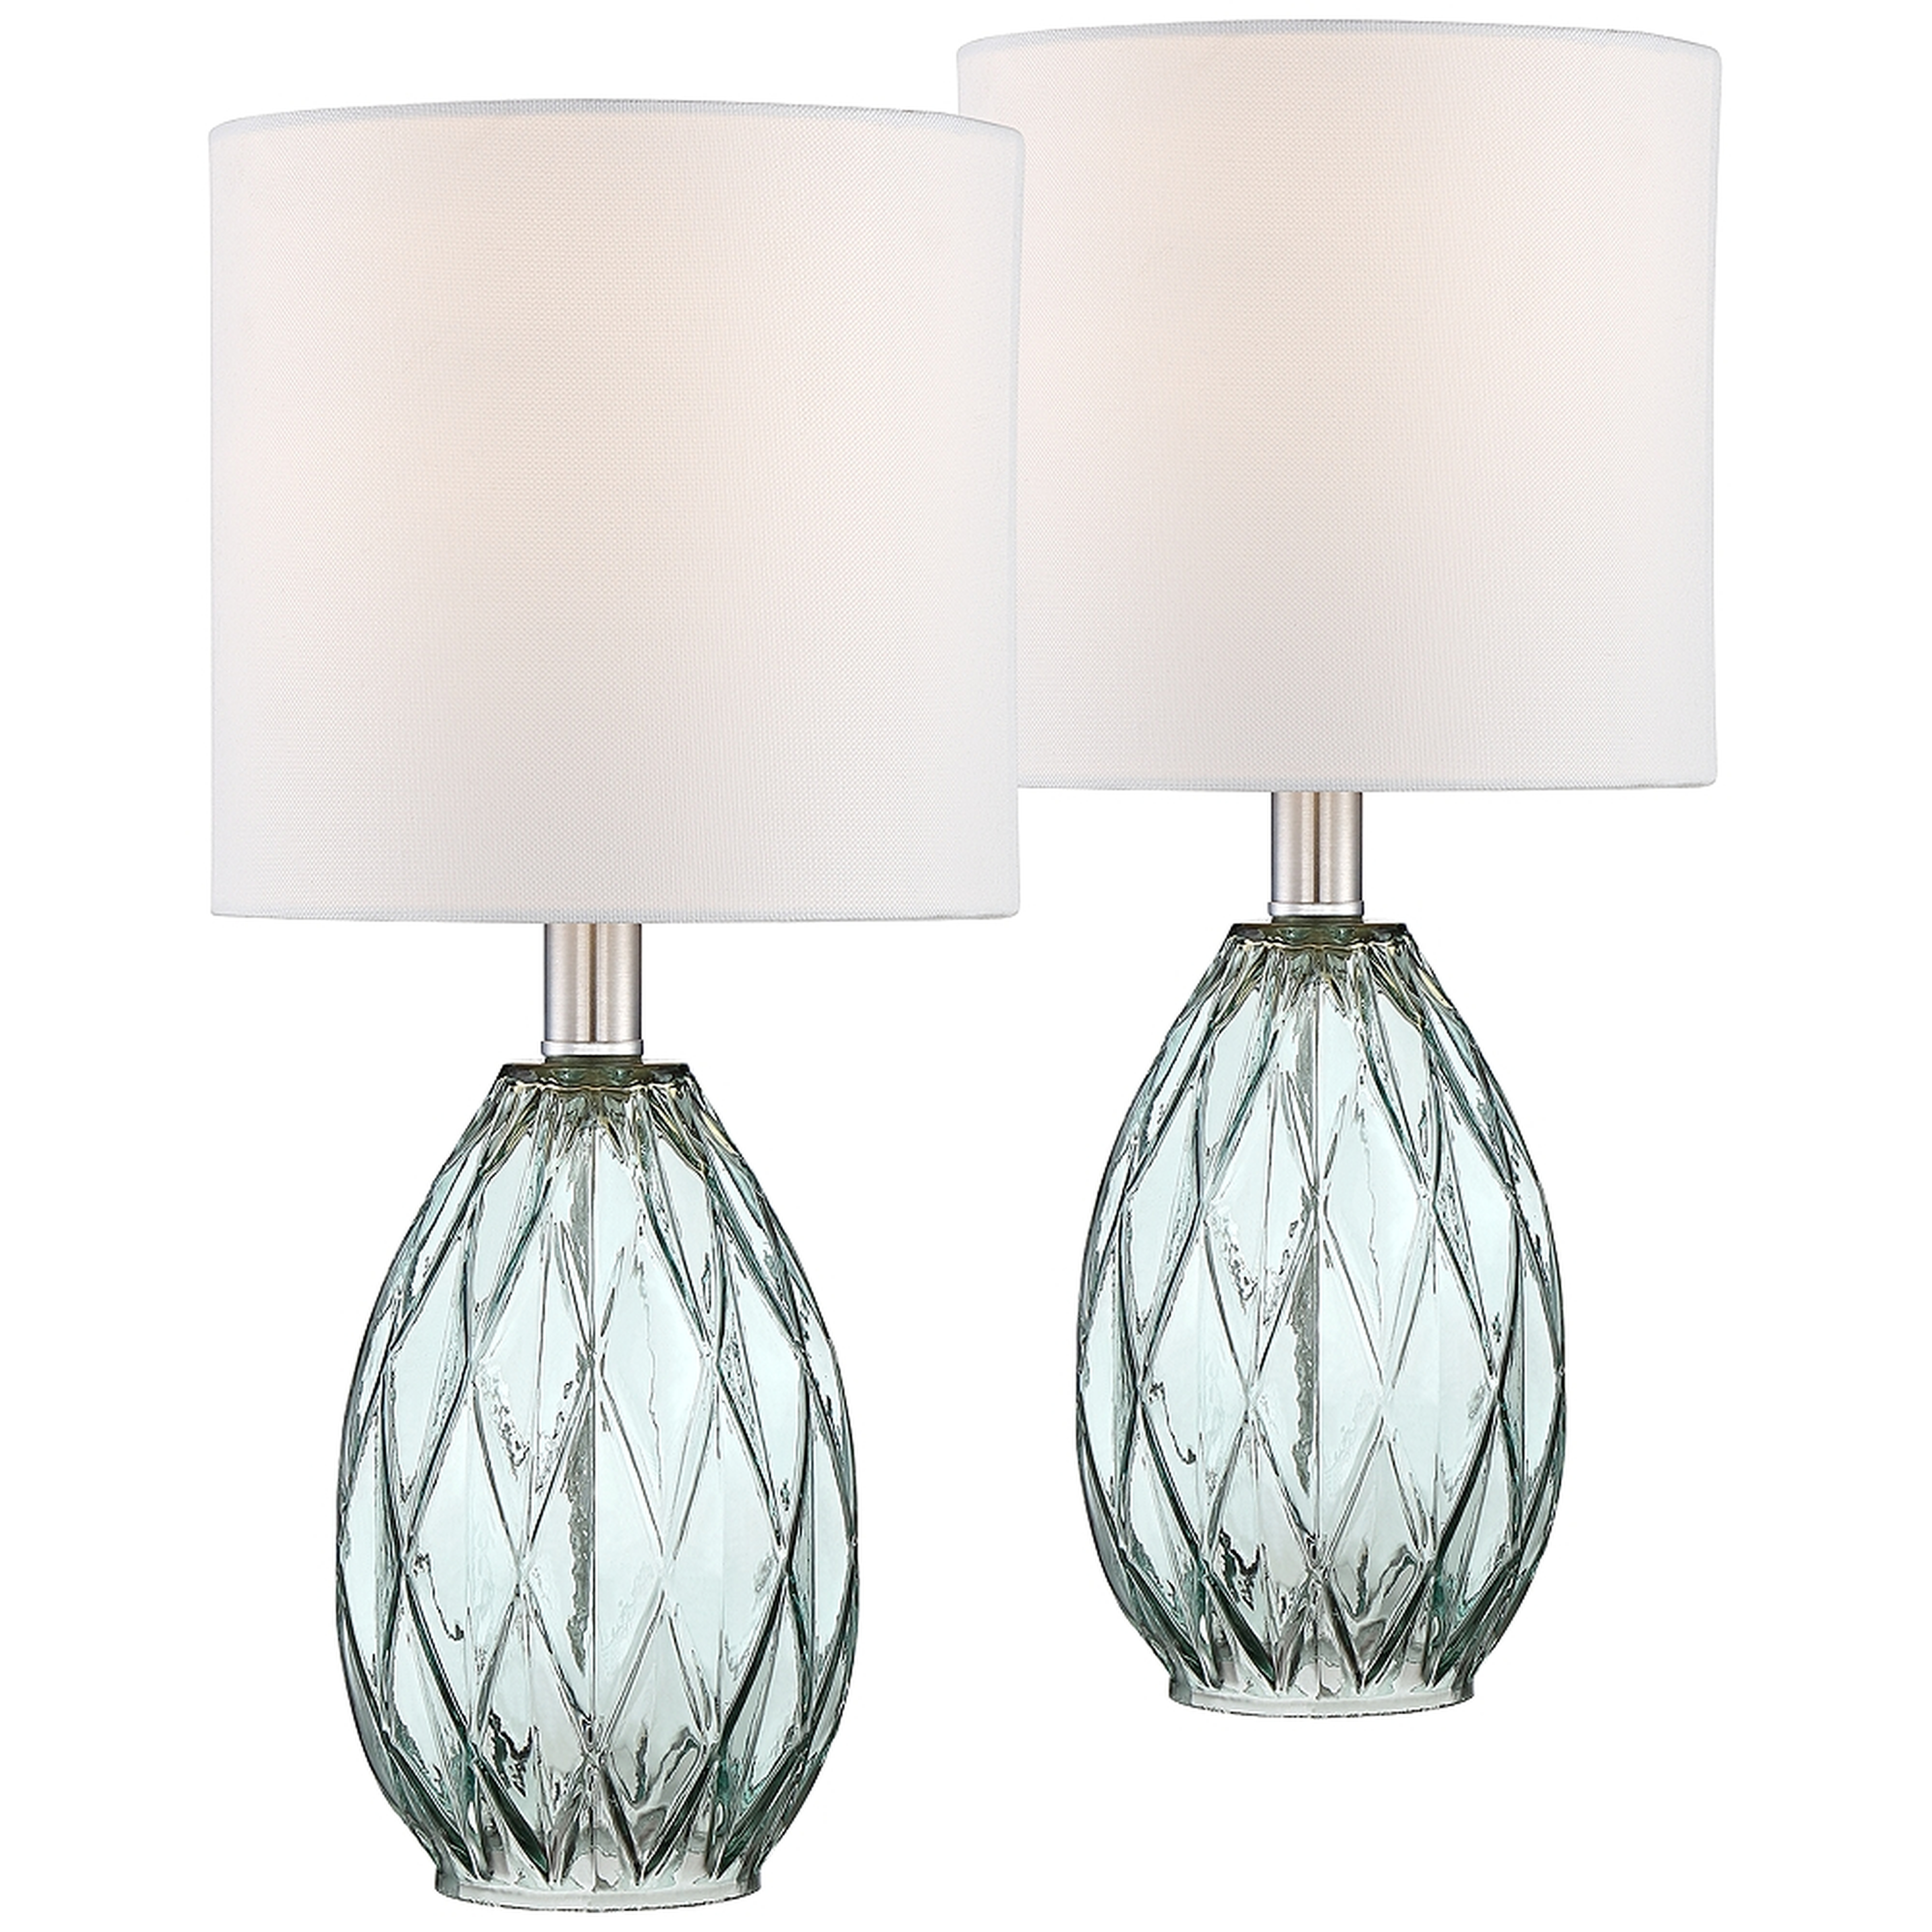 360 Lighting Rita 14 3/4" Blue-Green Glass Accent Table Lamps Set of 2 - Lamps Plus